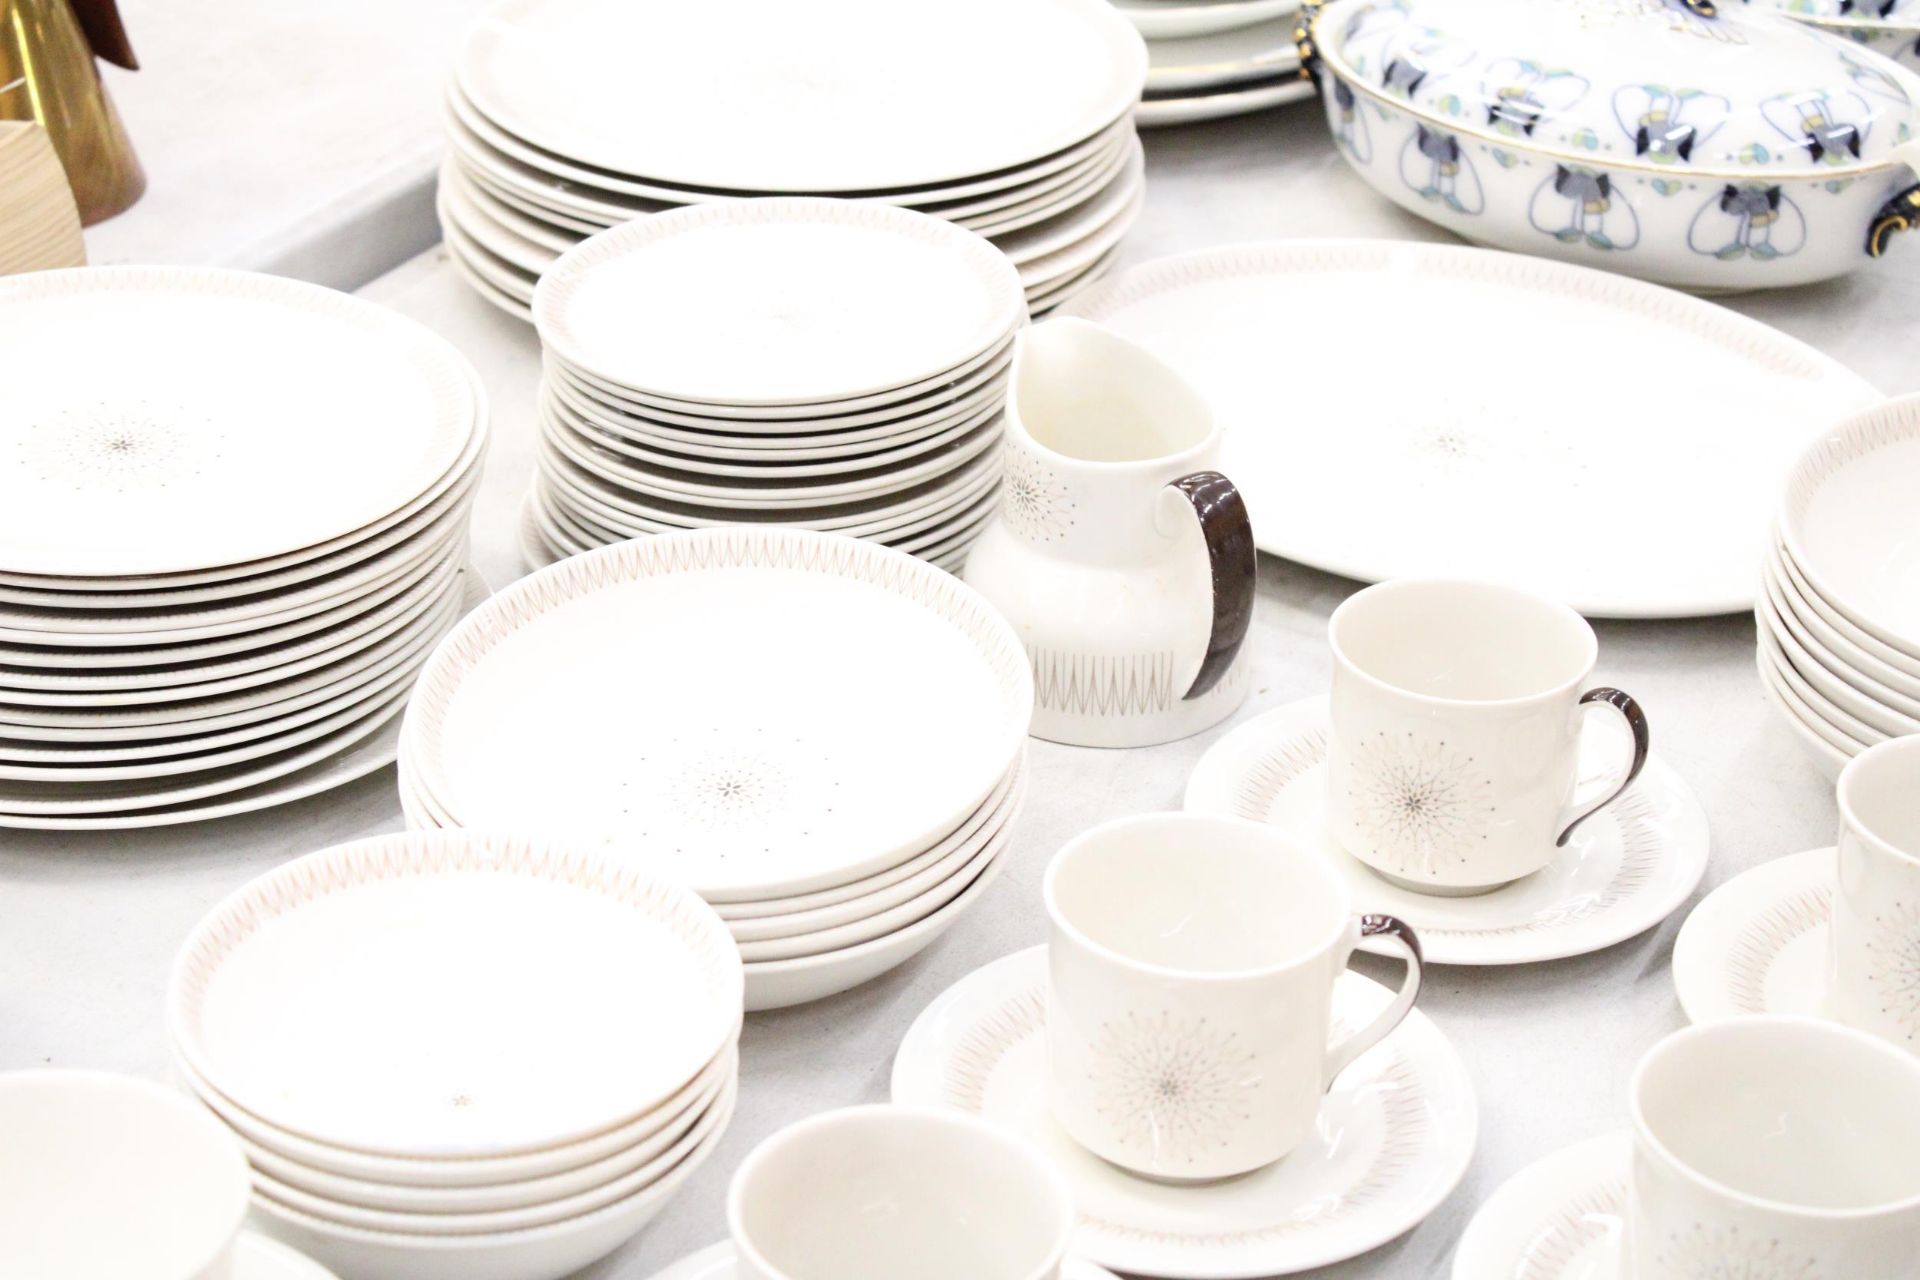 A LARGE ROYAL DOULTON "MORNING STAR" DINNER SERVICE TO INCLUDE CUPS, SAUCERS, PLATES, TEA POT, JUG - Image 6 of 6